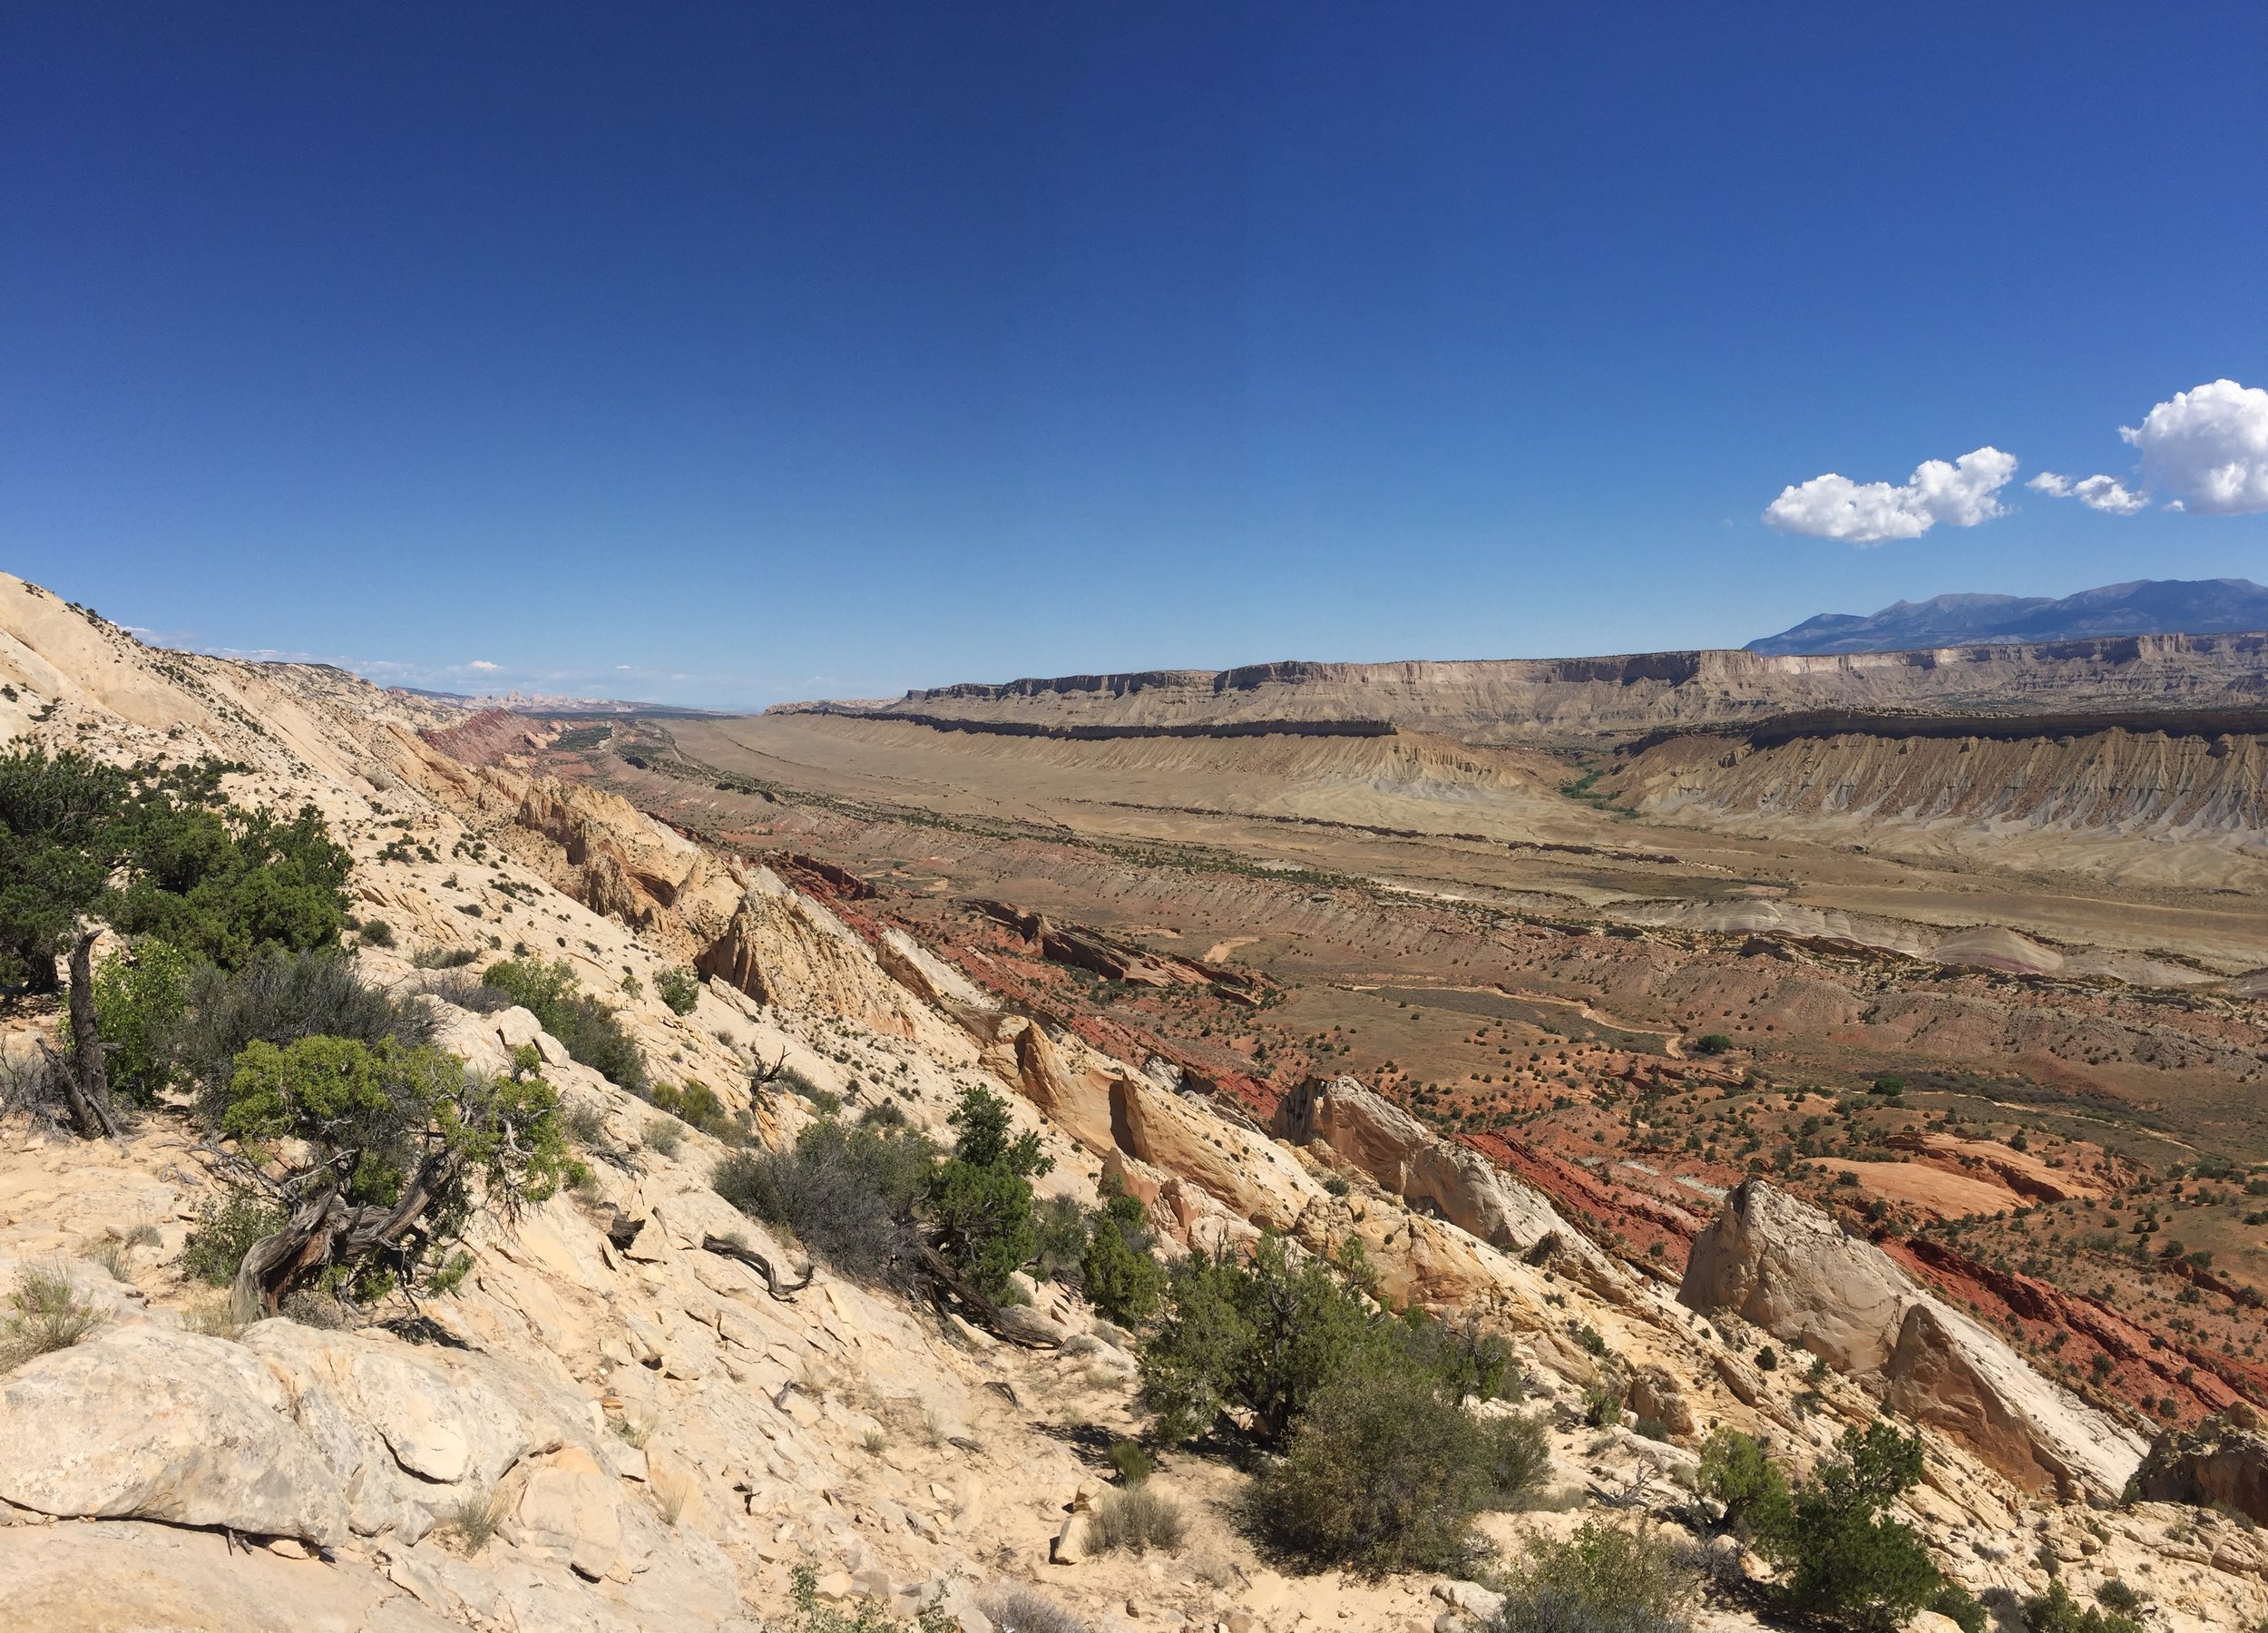 AUGUST, 2017 – CAPITOL REEF NATIONAL PARK: Pictured: Capitol Reef is situated on a geological feature called a “Monocline” nicknamed the Waterpocket Fold – a ripple in the earth’s crust 97 miles long.